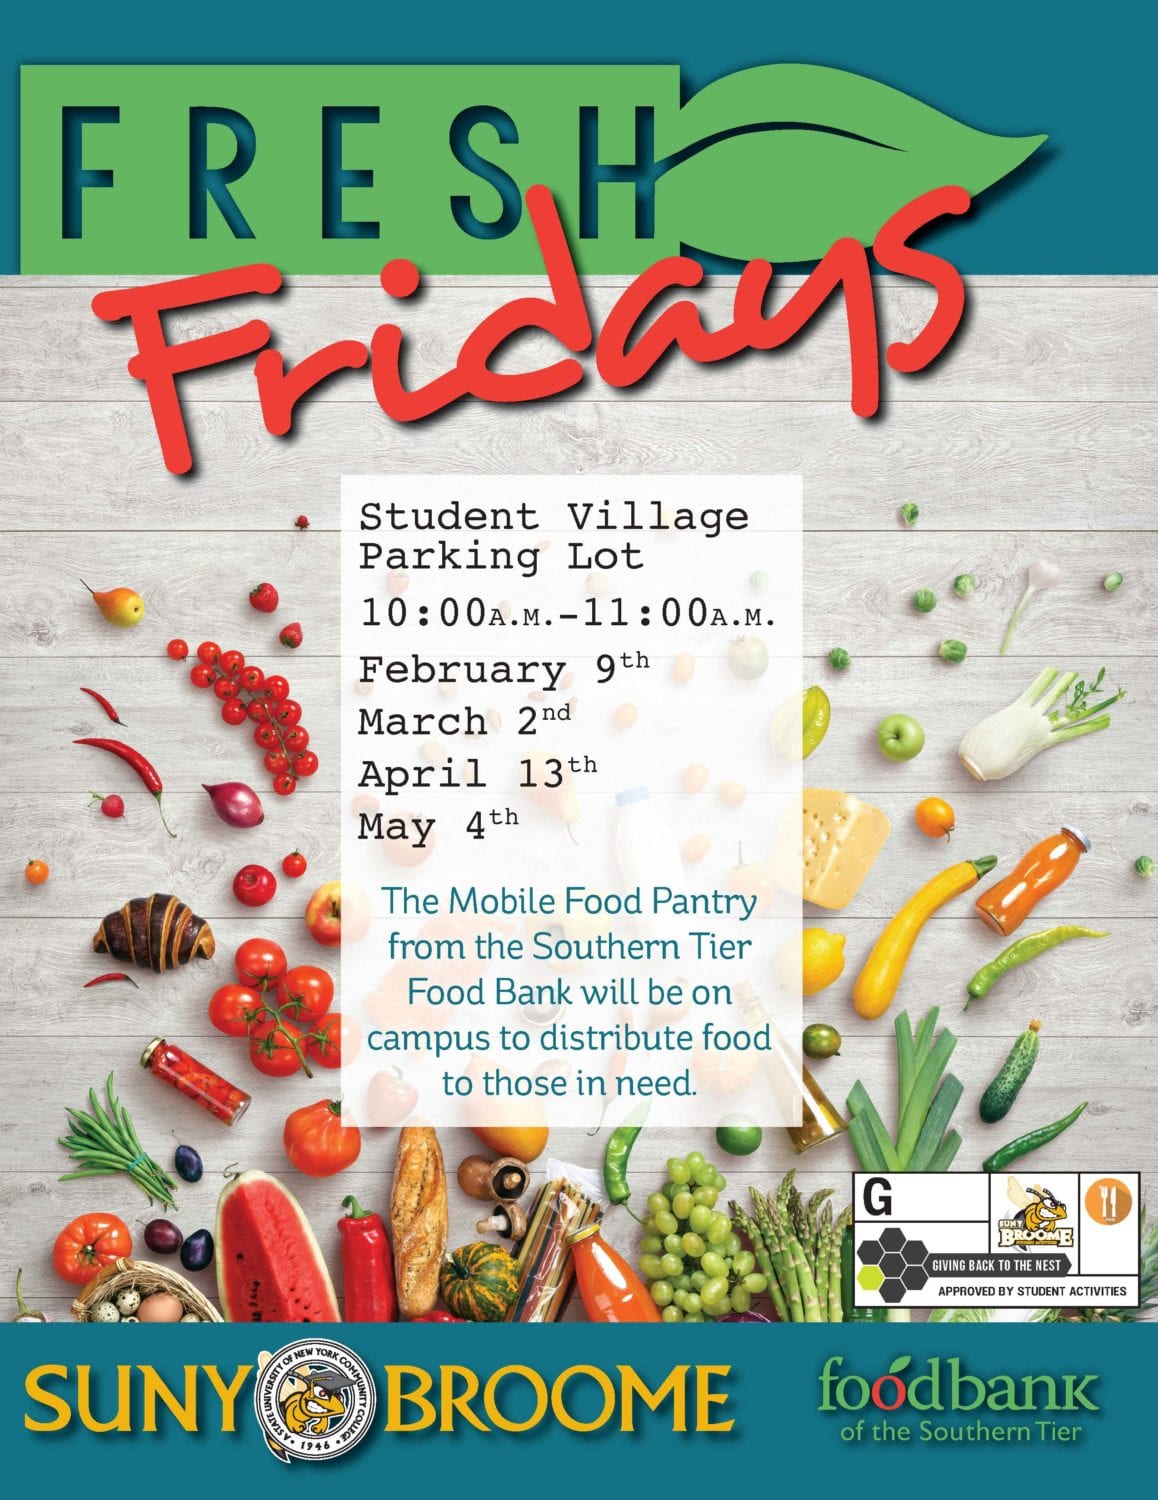 Need food? Fresh Fridays comes to campus on April 13